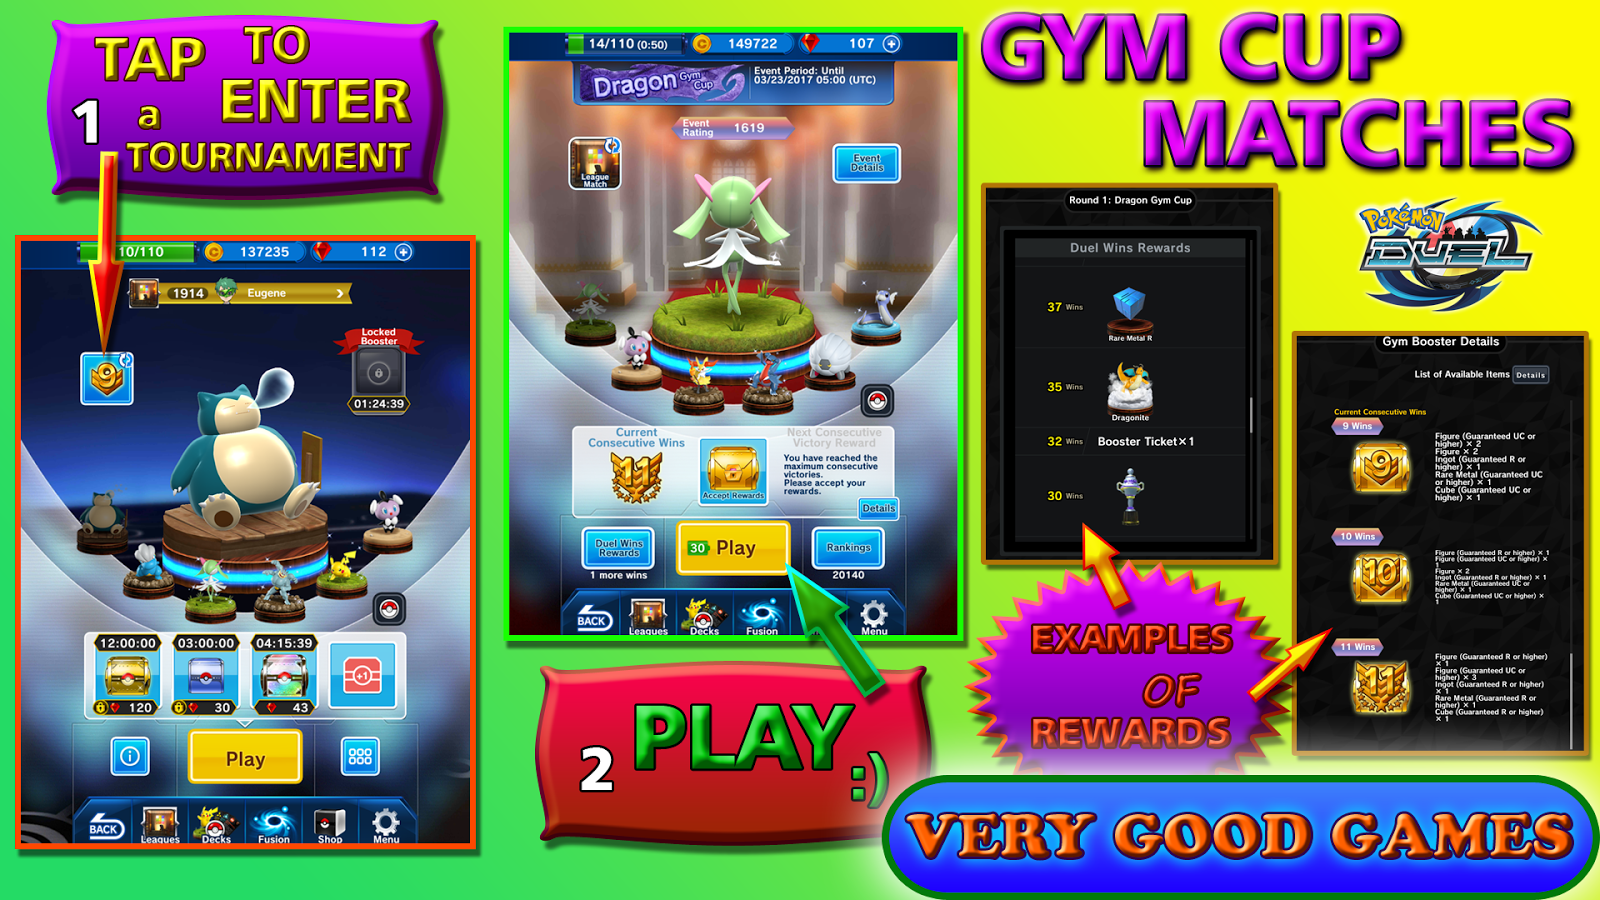 Pokemon Duel tutorial - Tournaments or Gym Cup matches